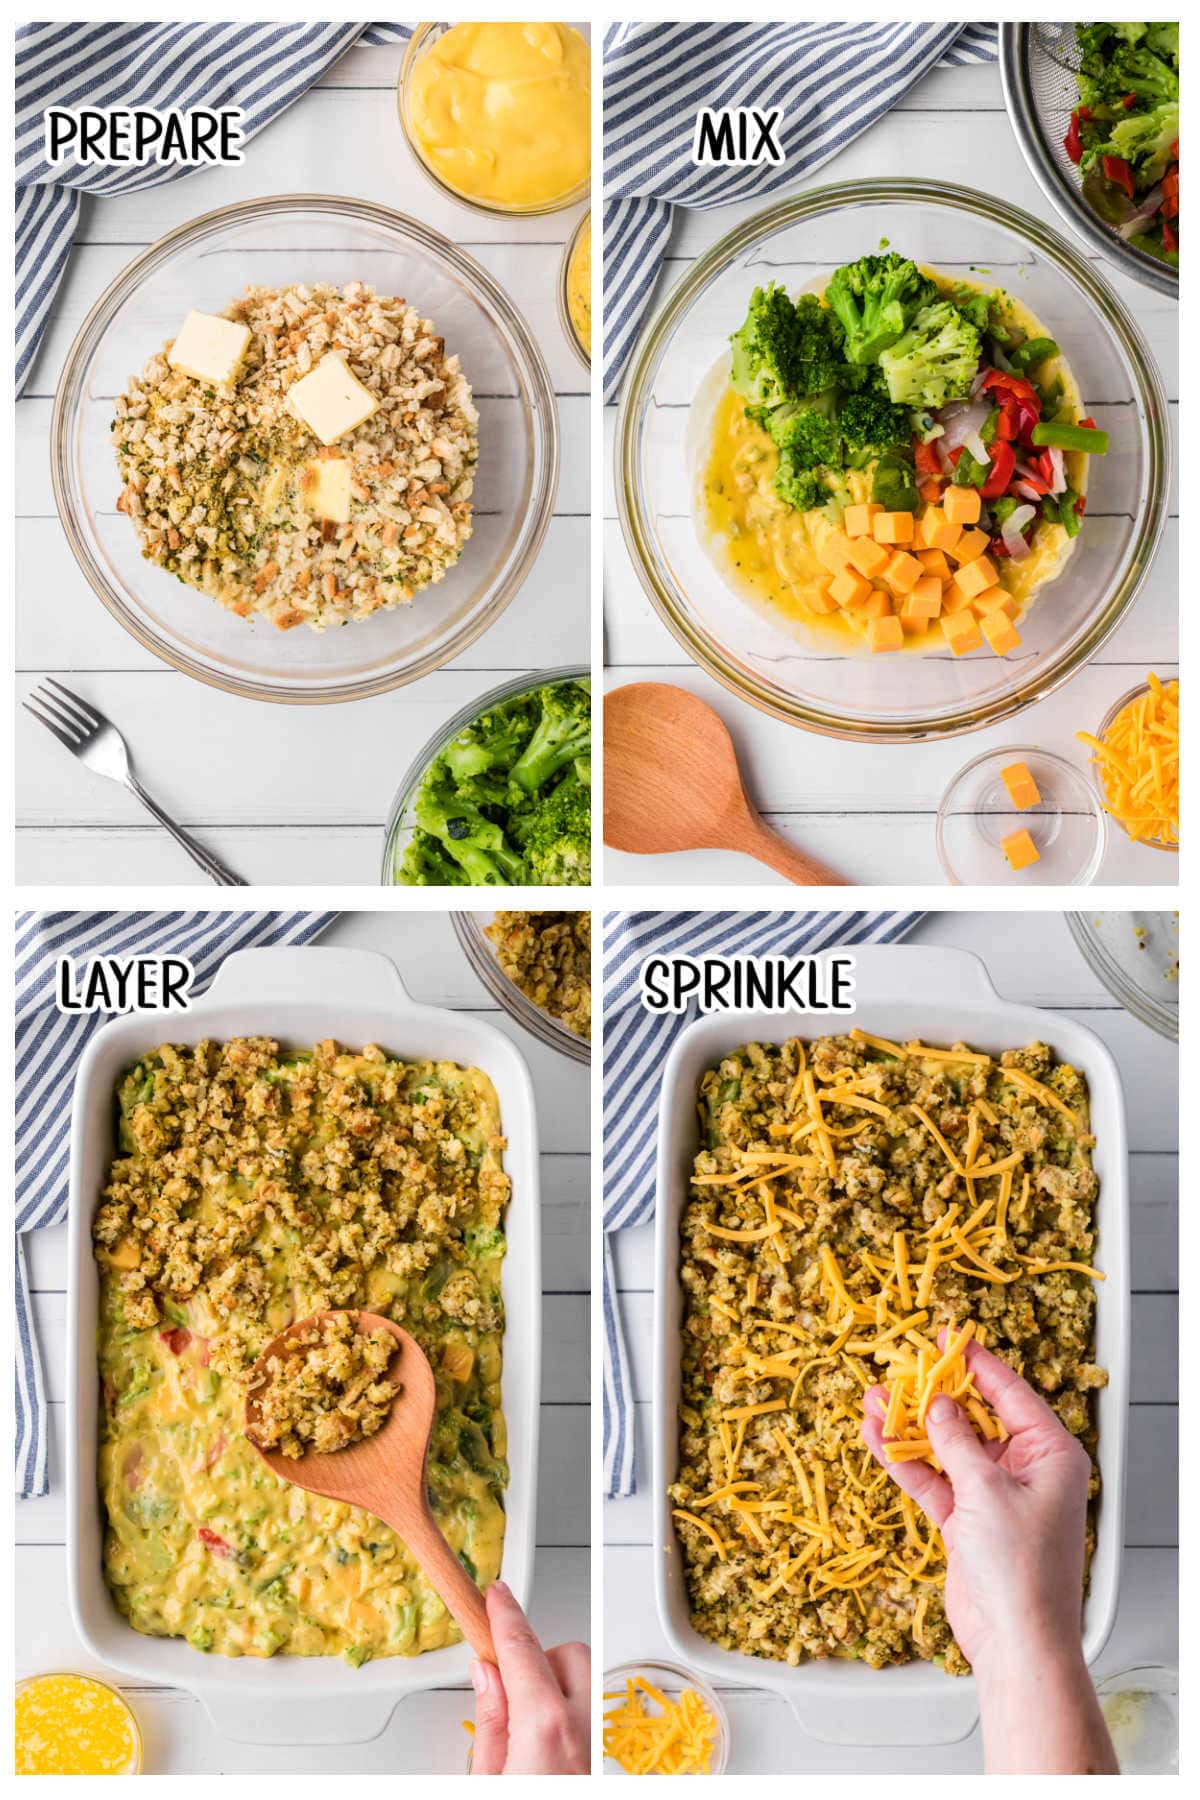 Four images with text overlay showing recipe steps: stuffing mix and butter in a glass bowl, soups and veggies in a glass bowl, broccoli mixture and stuffing layered in a baking dish, and cheese sprinkled on top.